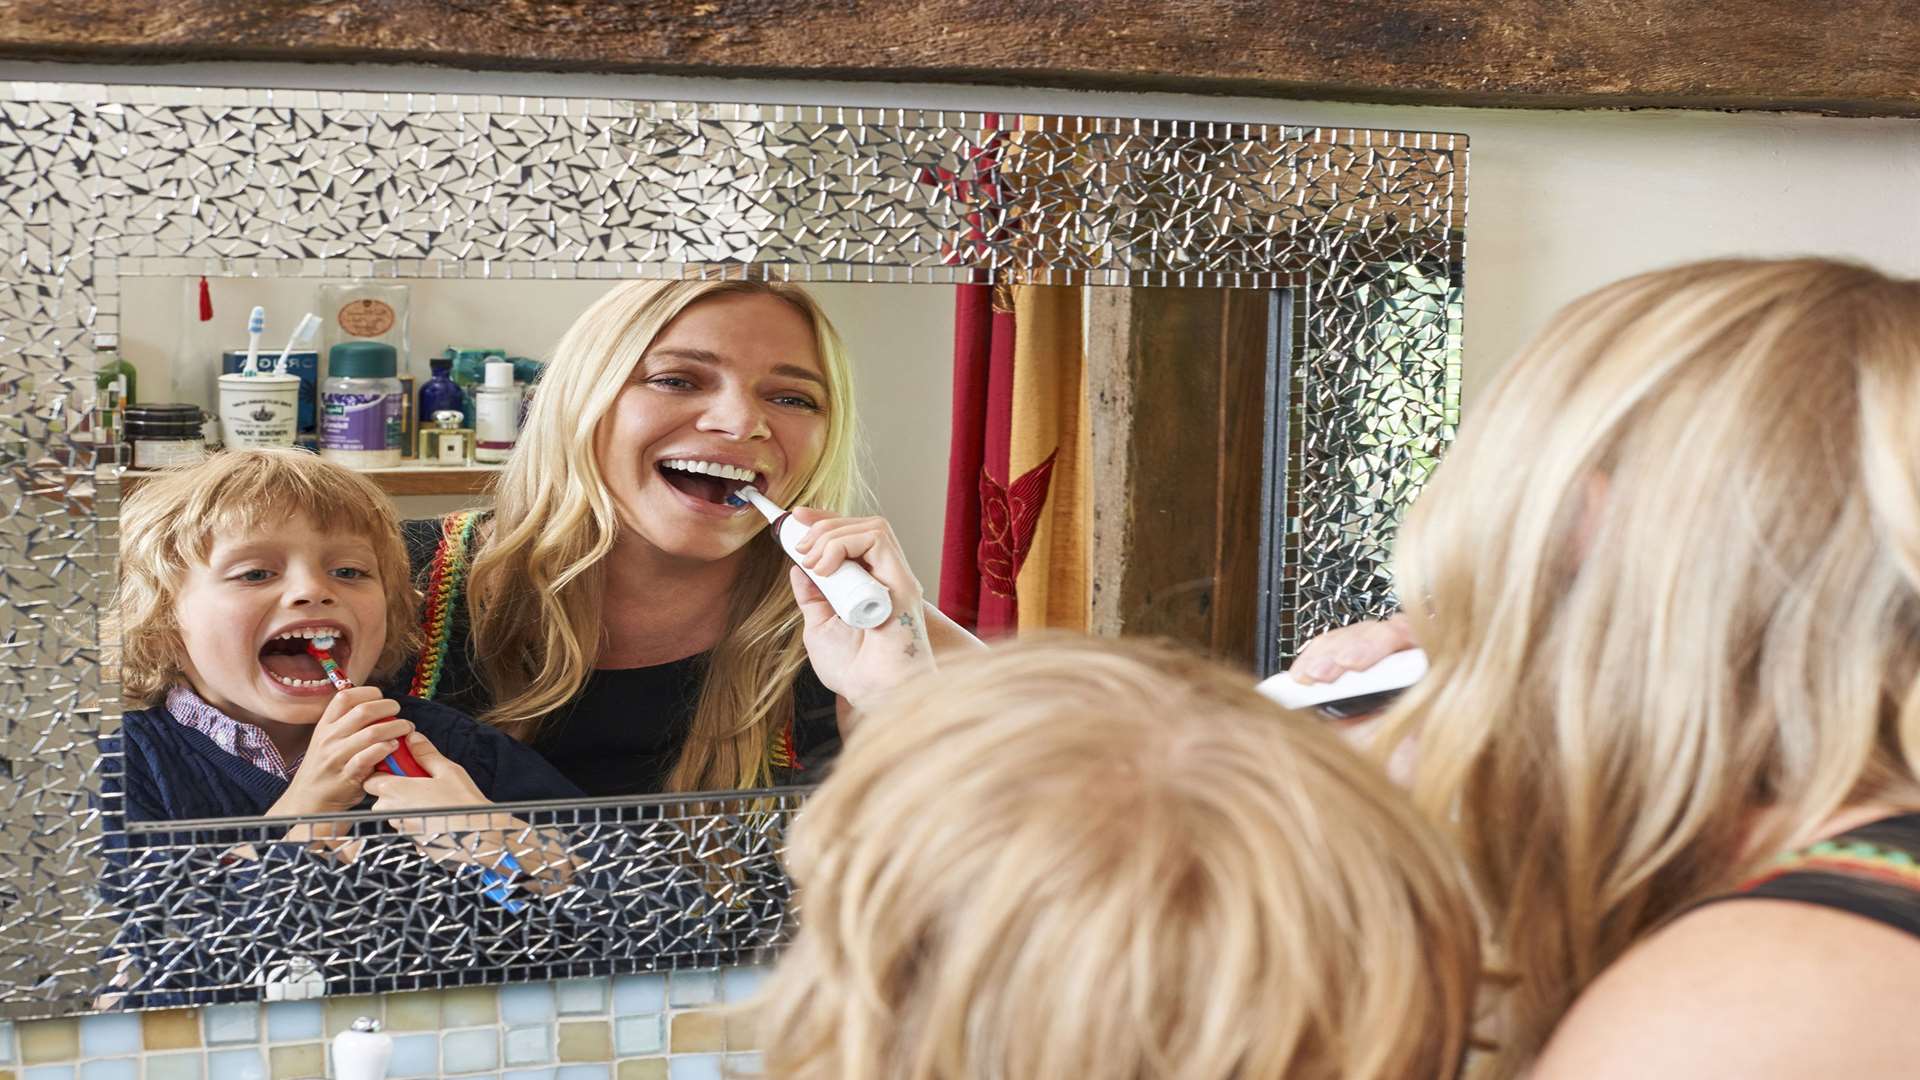 Jodie Kidd brushing her teeth with her son Indio